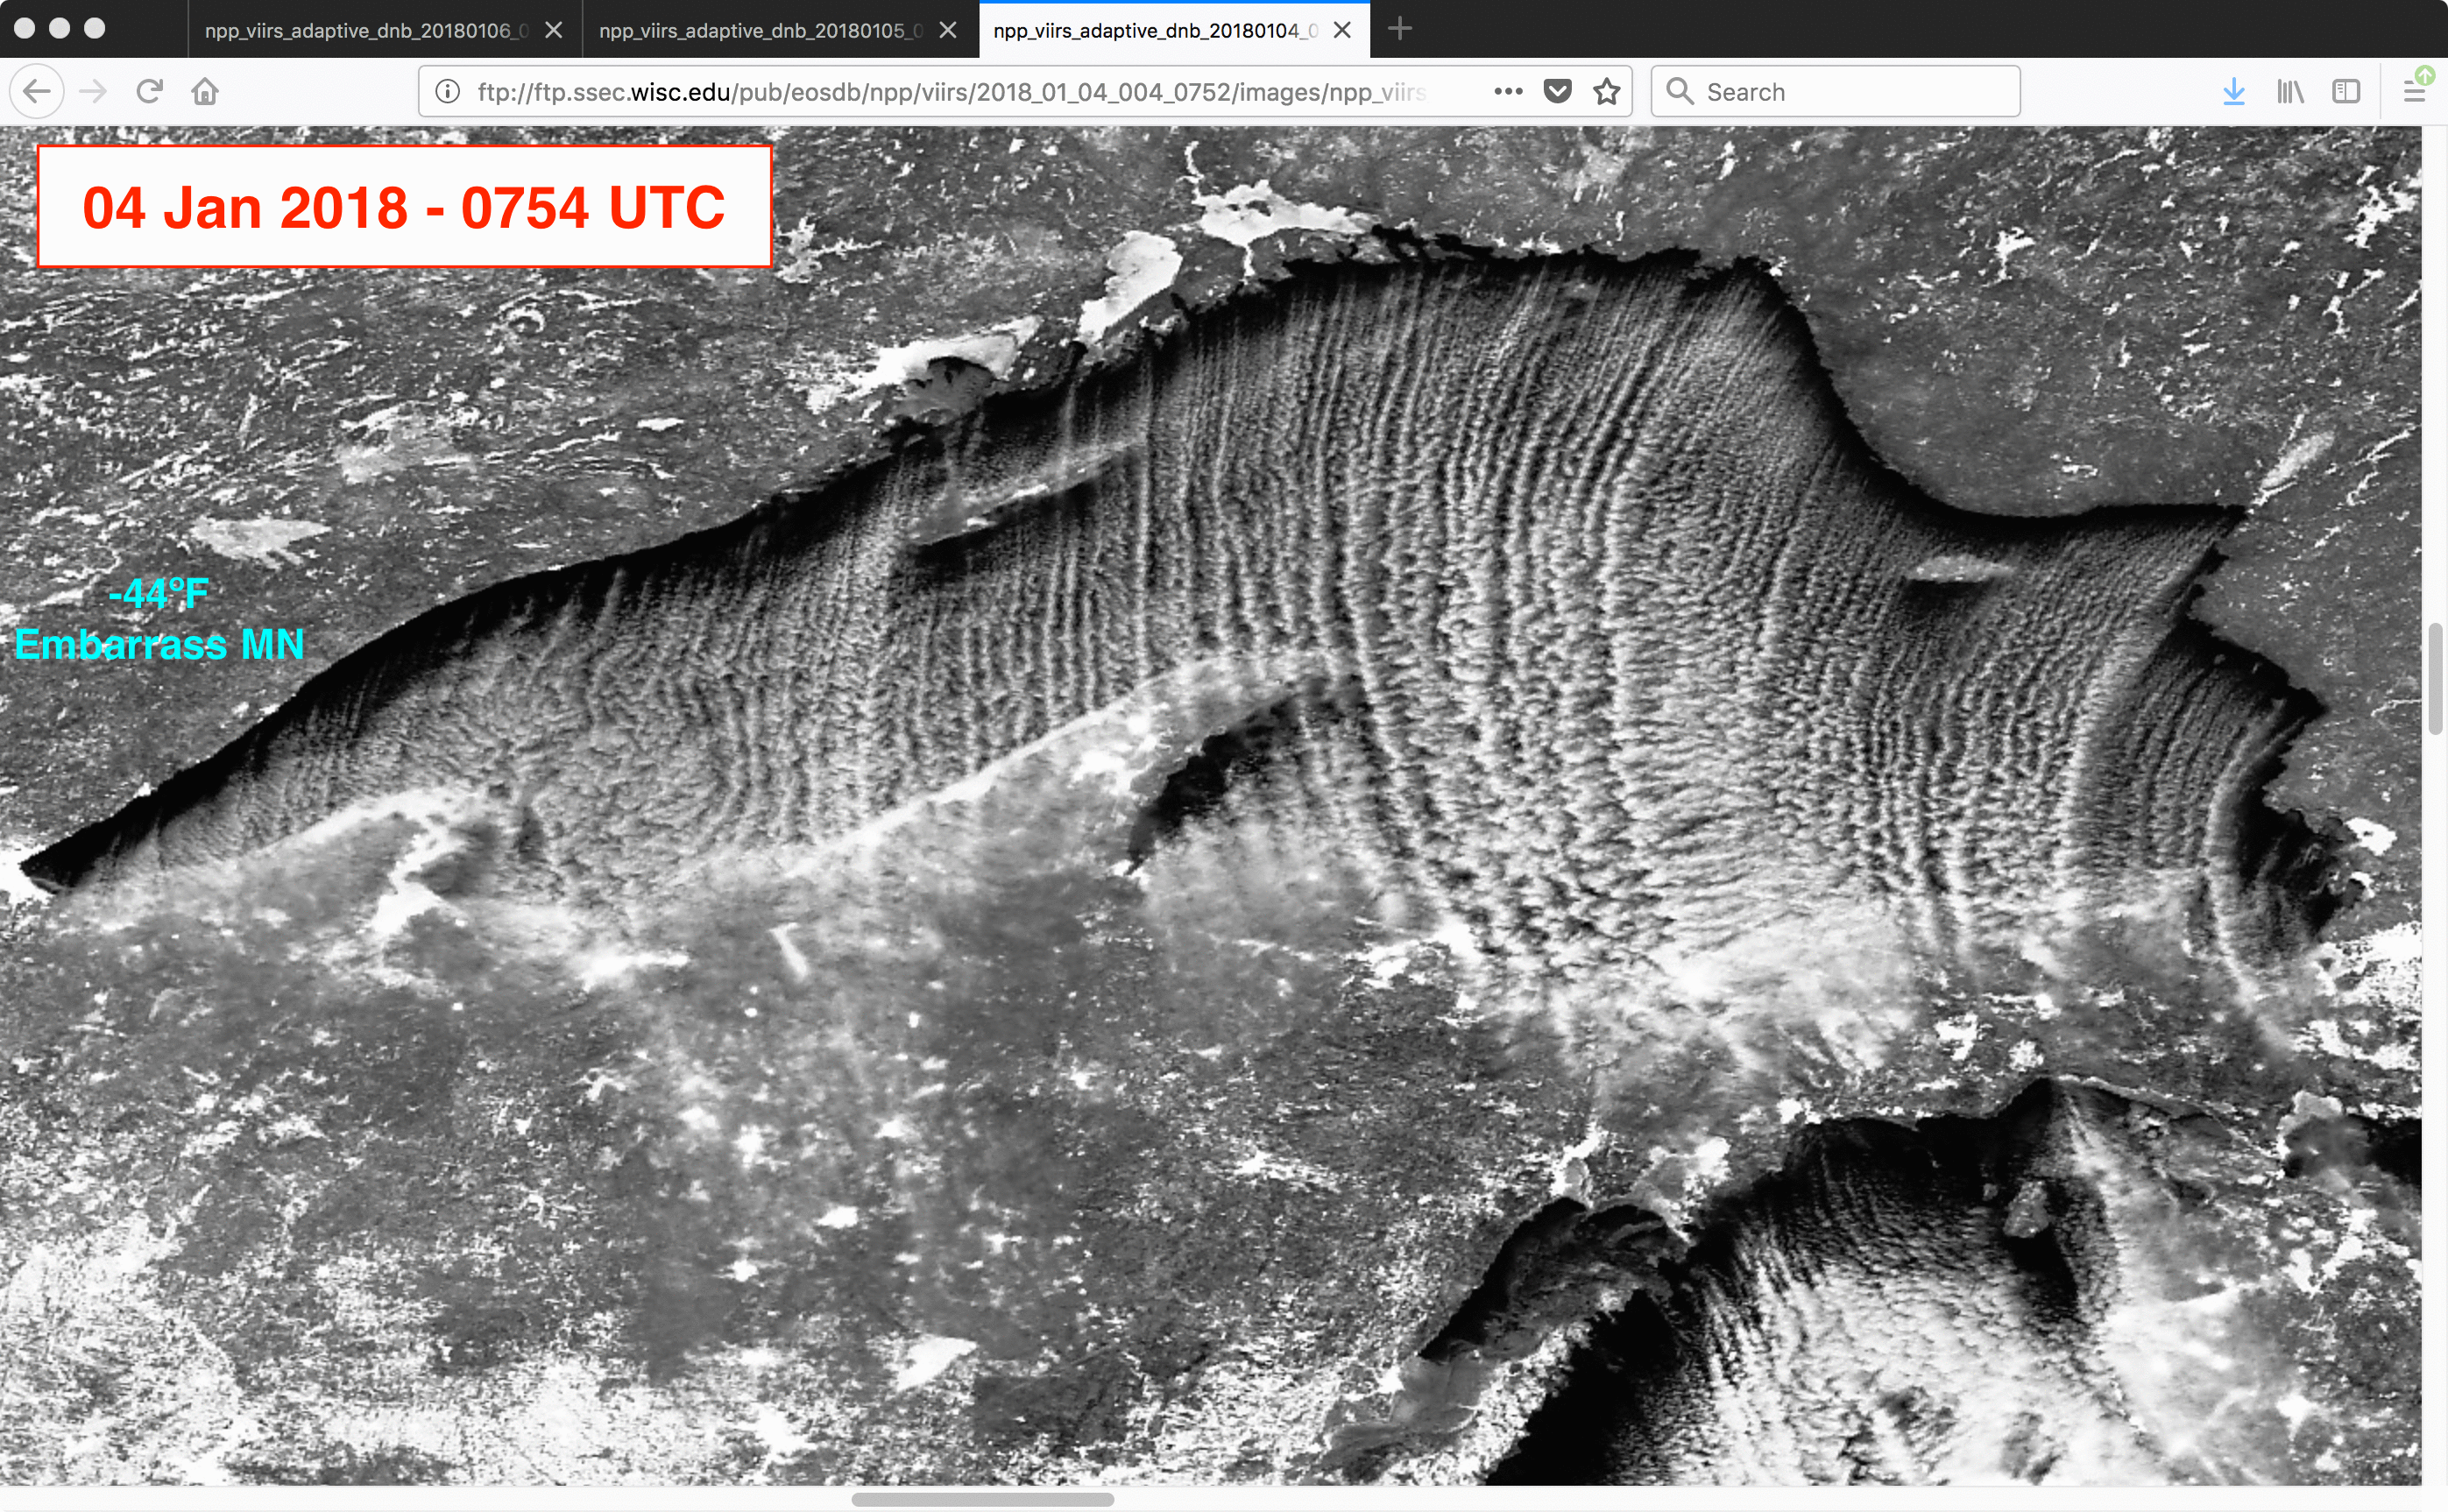 Suomi NPP VIIRS Day/Night Band (0.7 µm) images, with morning minimum temperatures at Embarrass, Minnesota [click to enlarge]